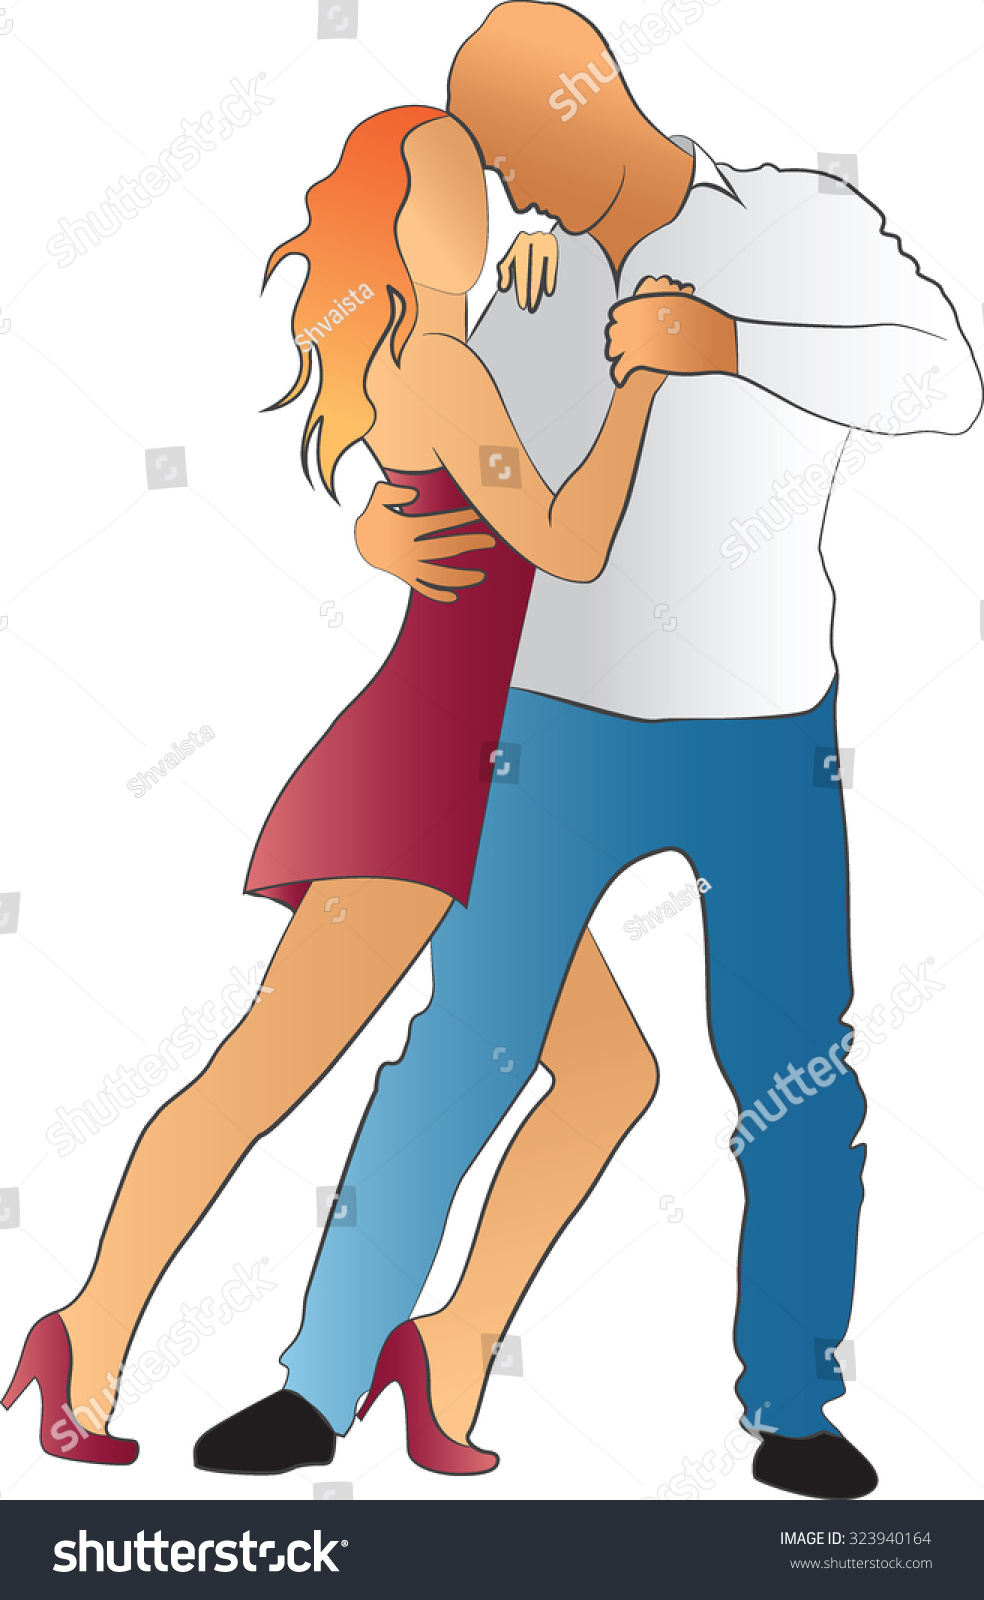 Dancing Couple In Color Stock Vector Illustration 323940164 : Shutterstock